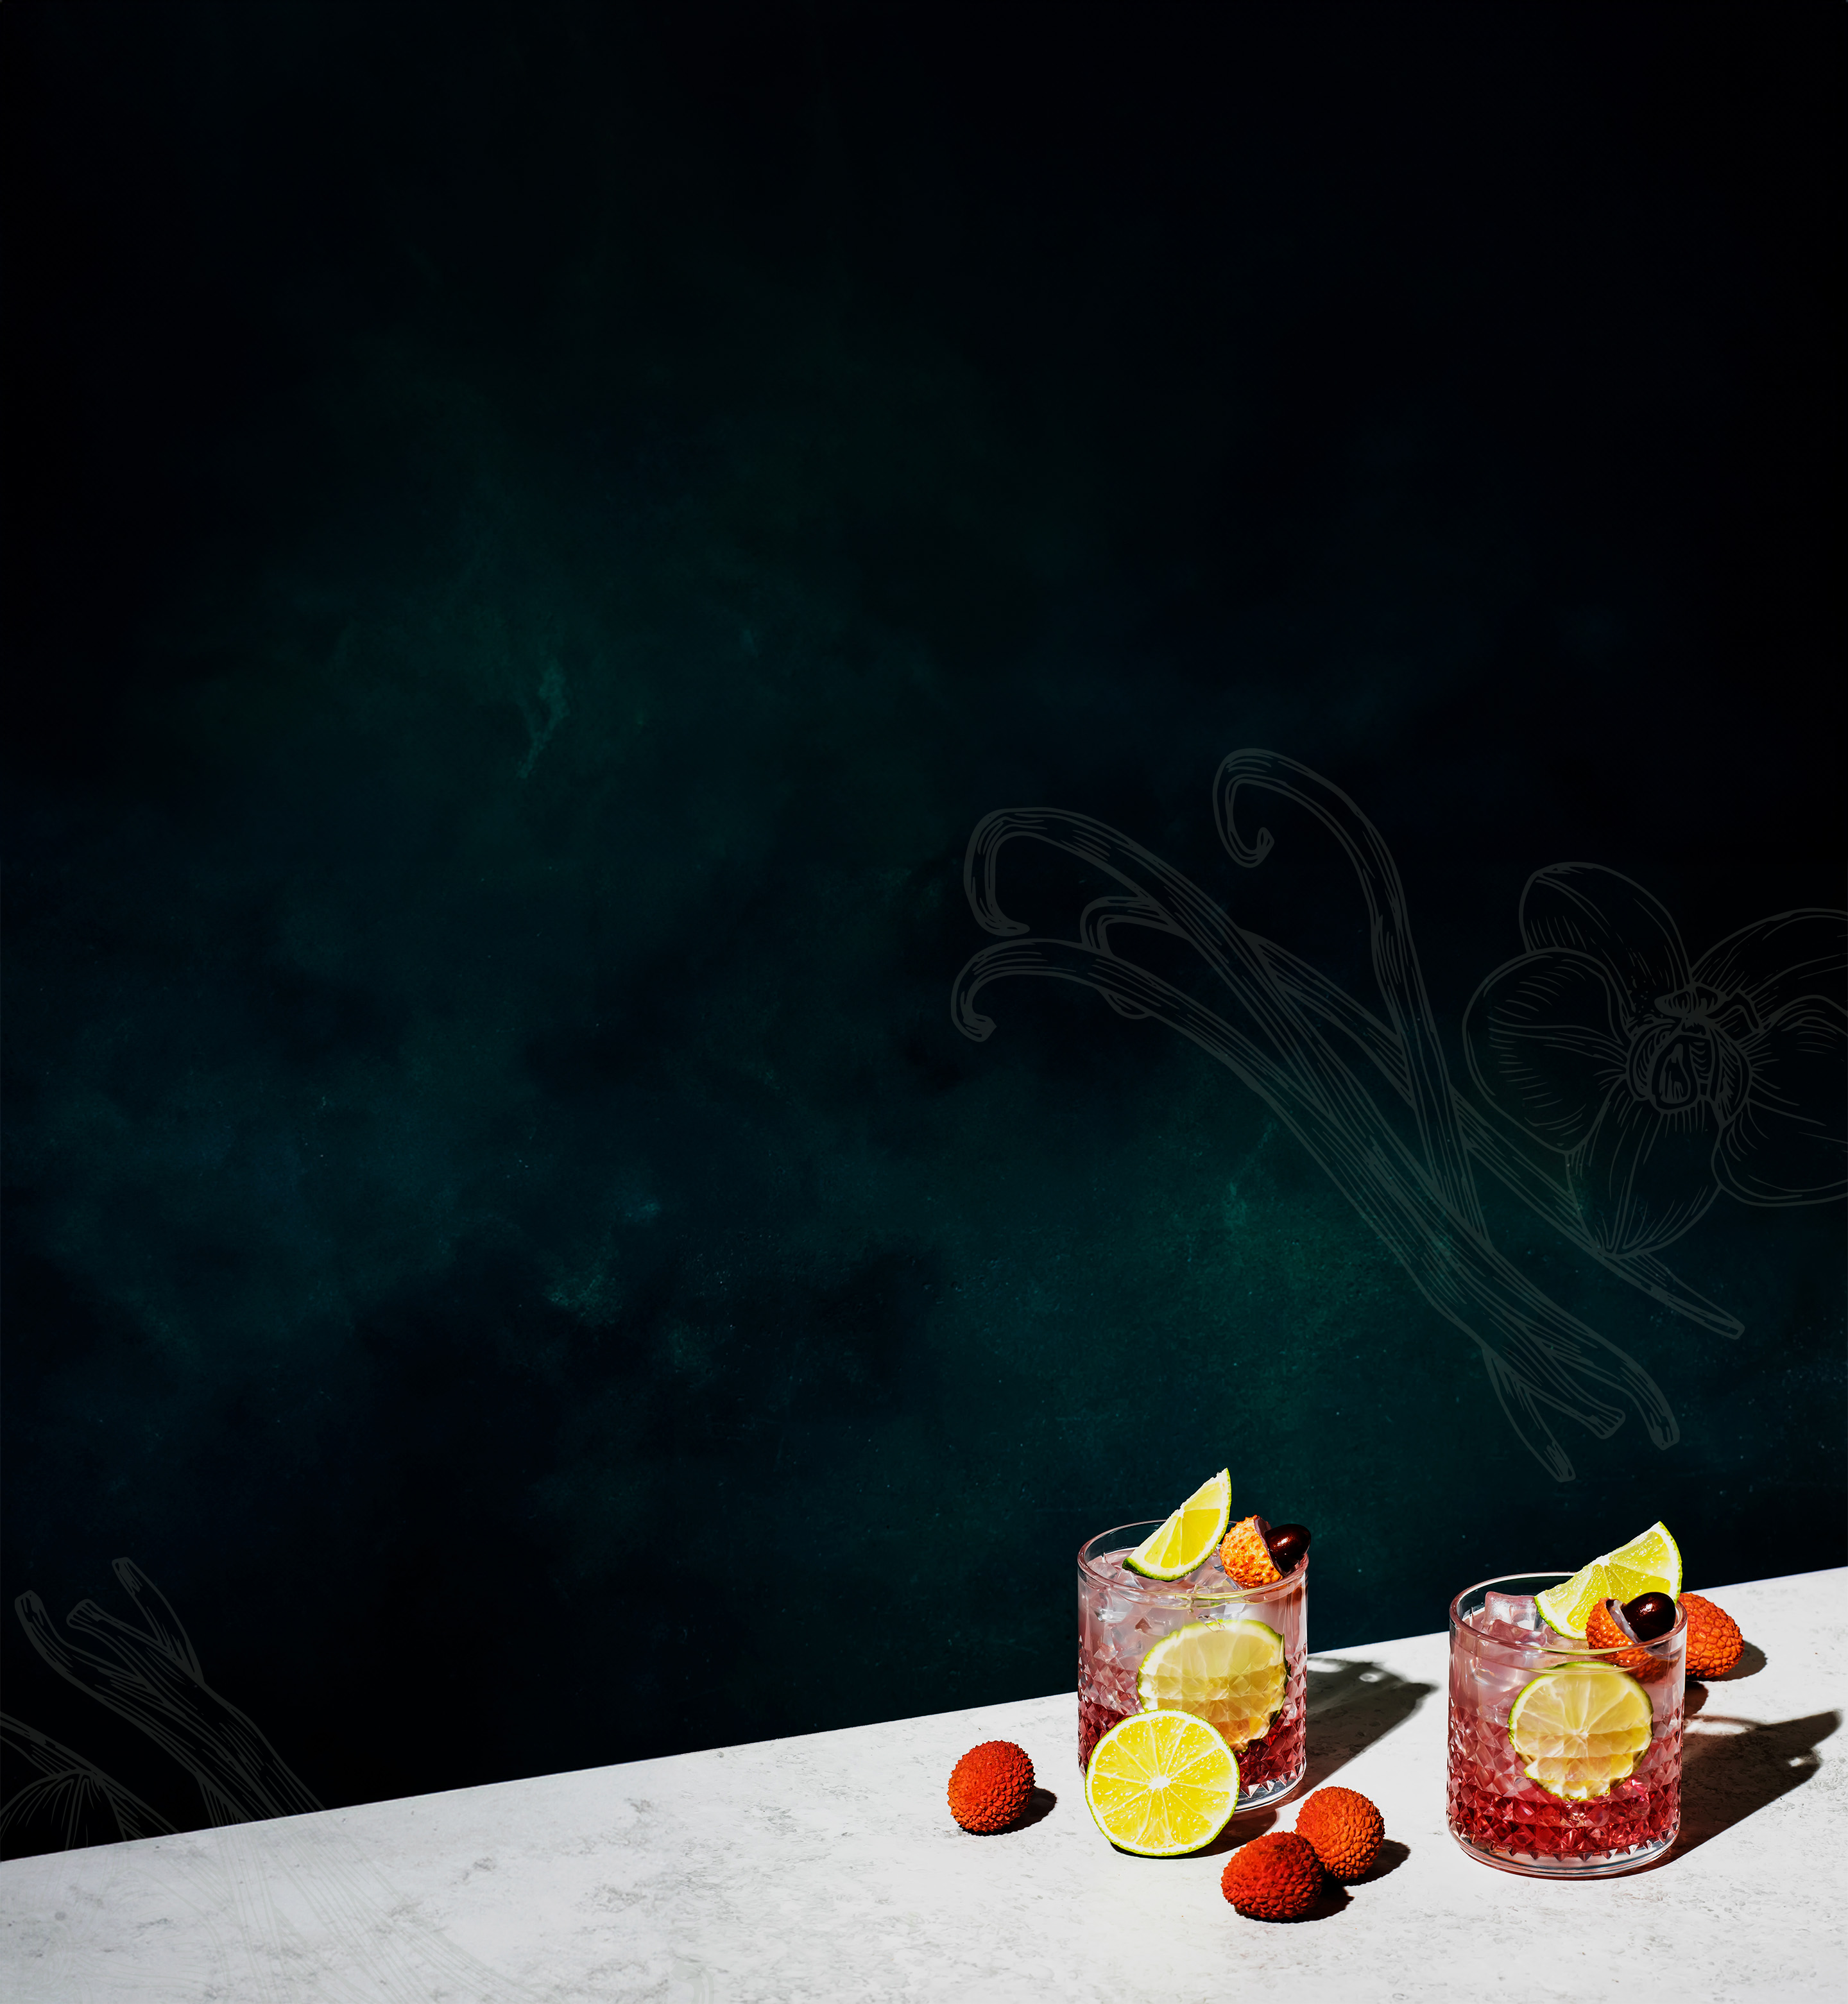 Two cocktail drinks with ice and fruit sitting on a white marble countertop against a dark green background